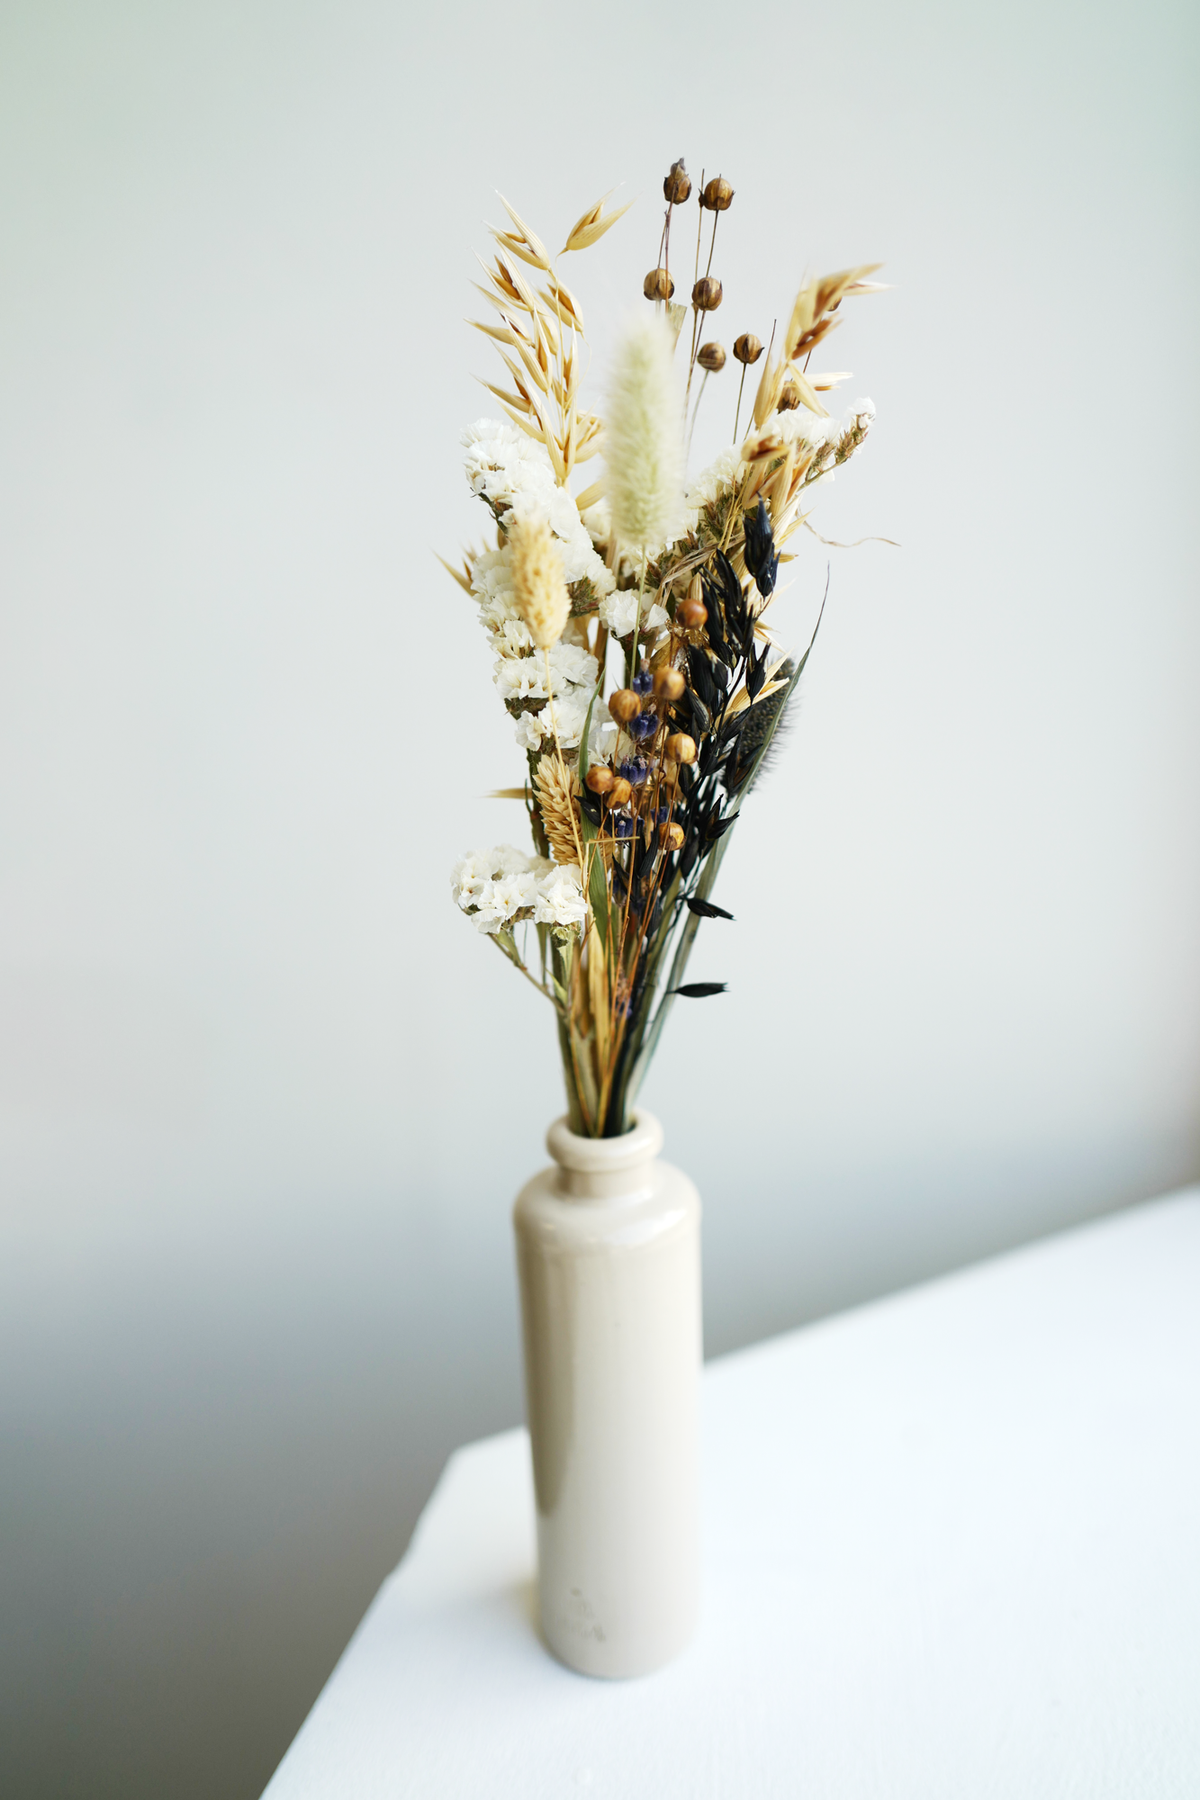 Gorgeous dried flowers in a vase